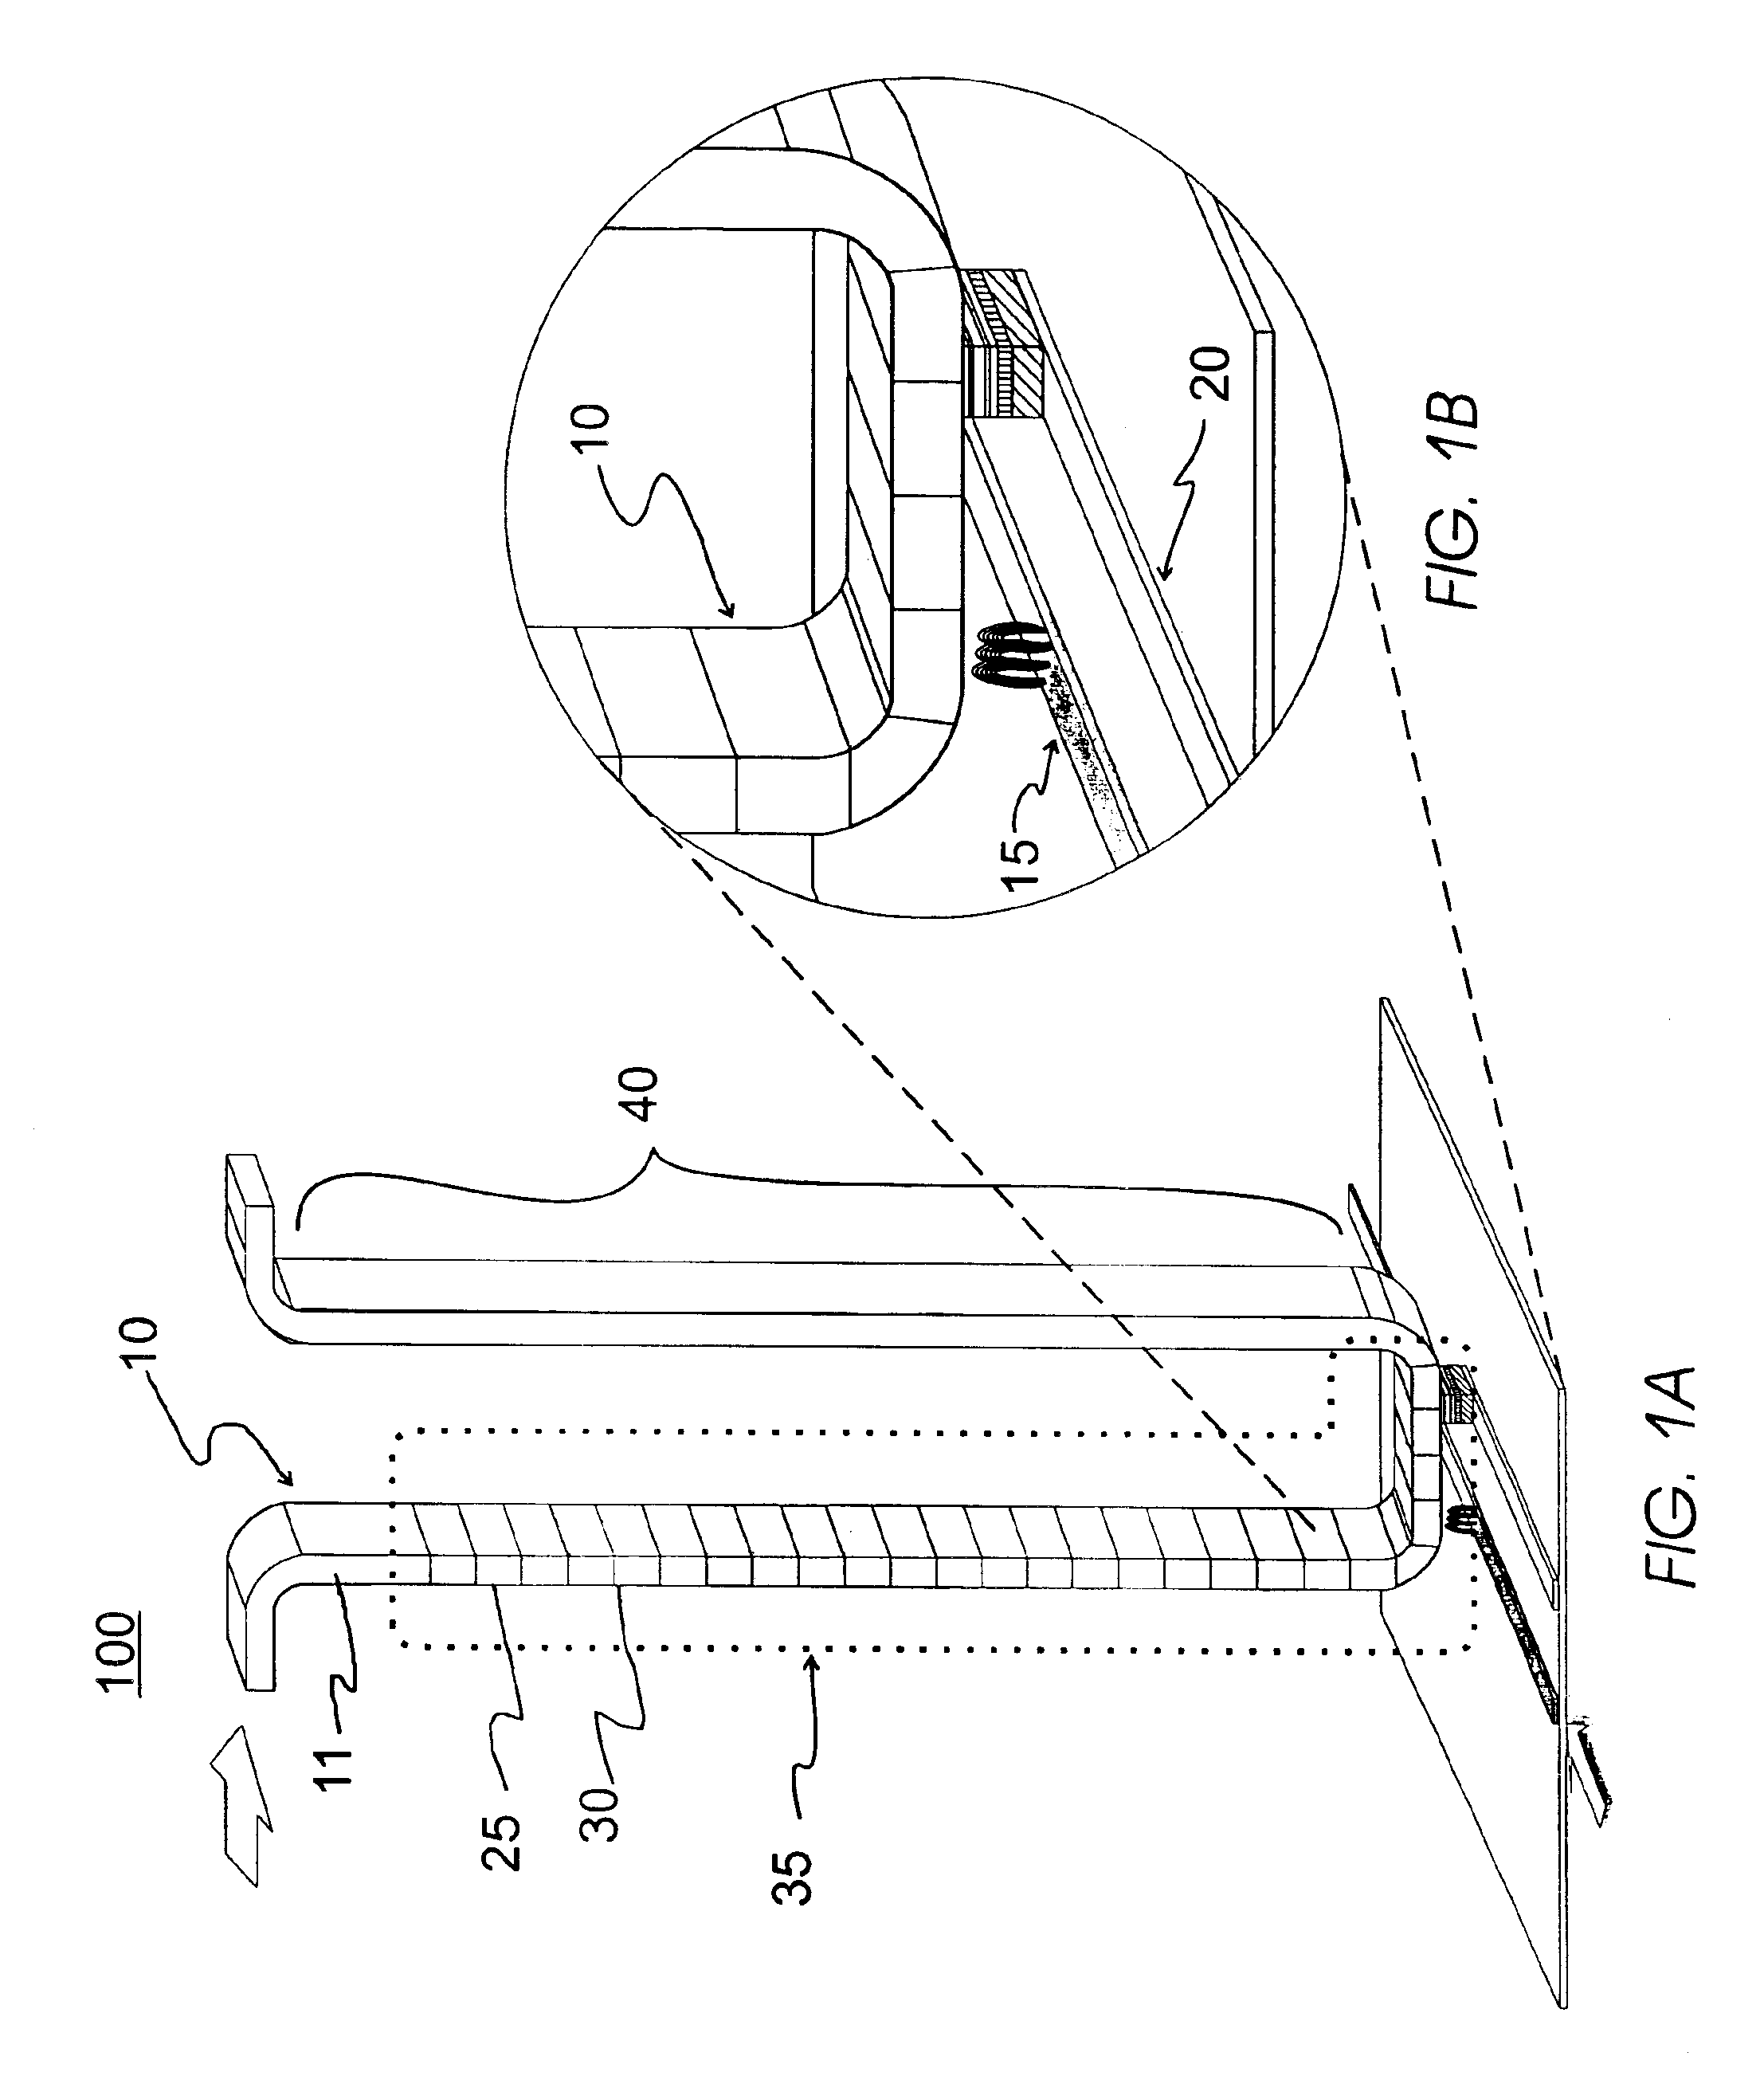 System and method for reading data stored on a magnetic shift register